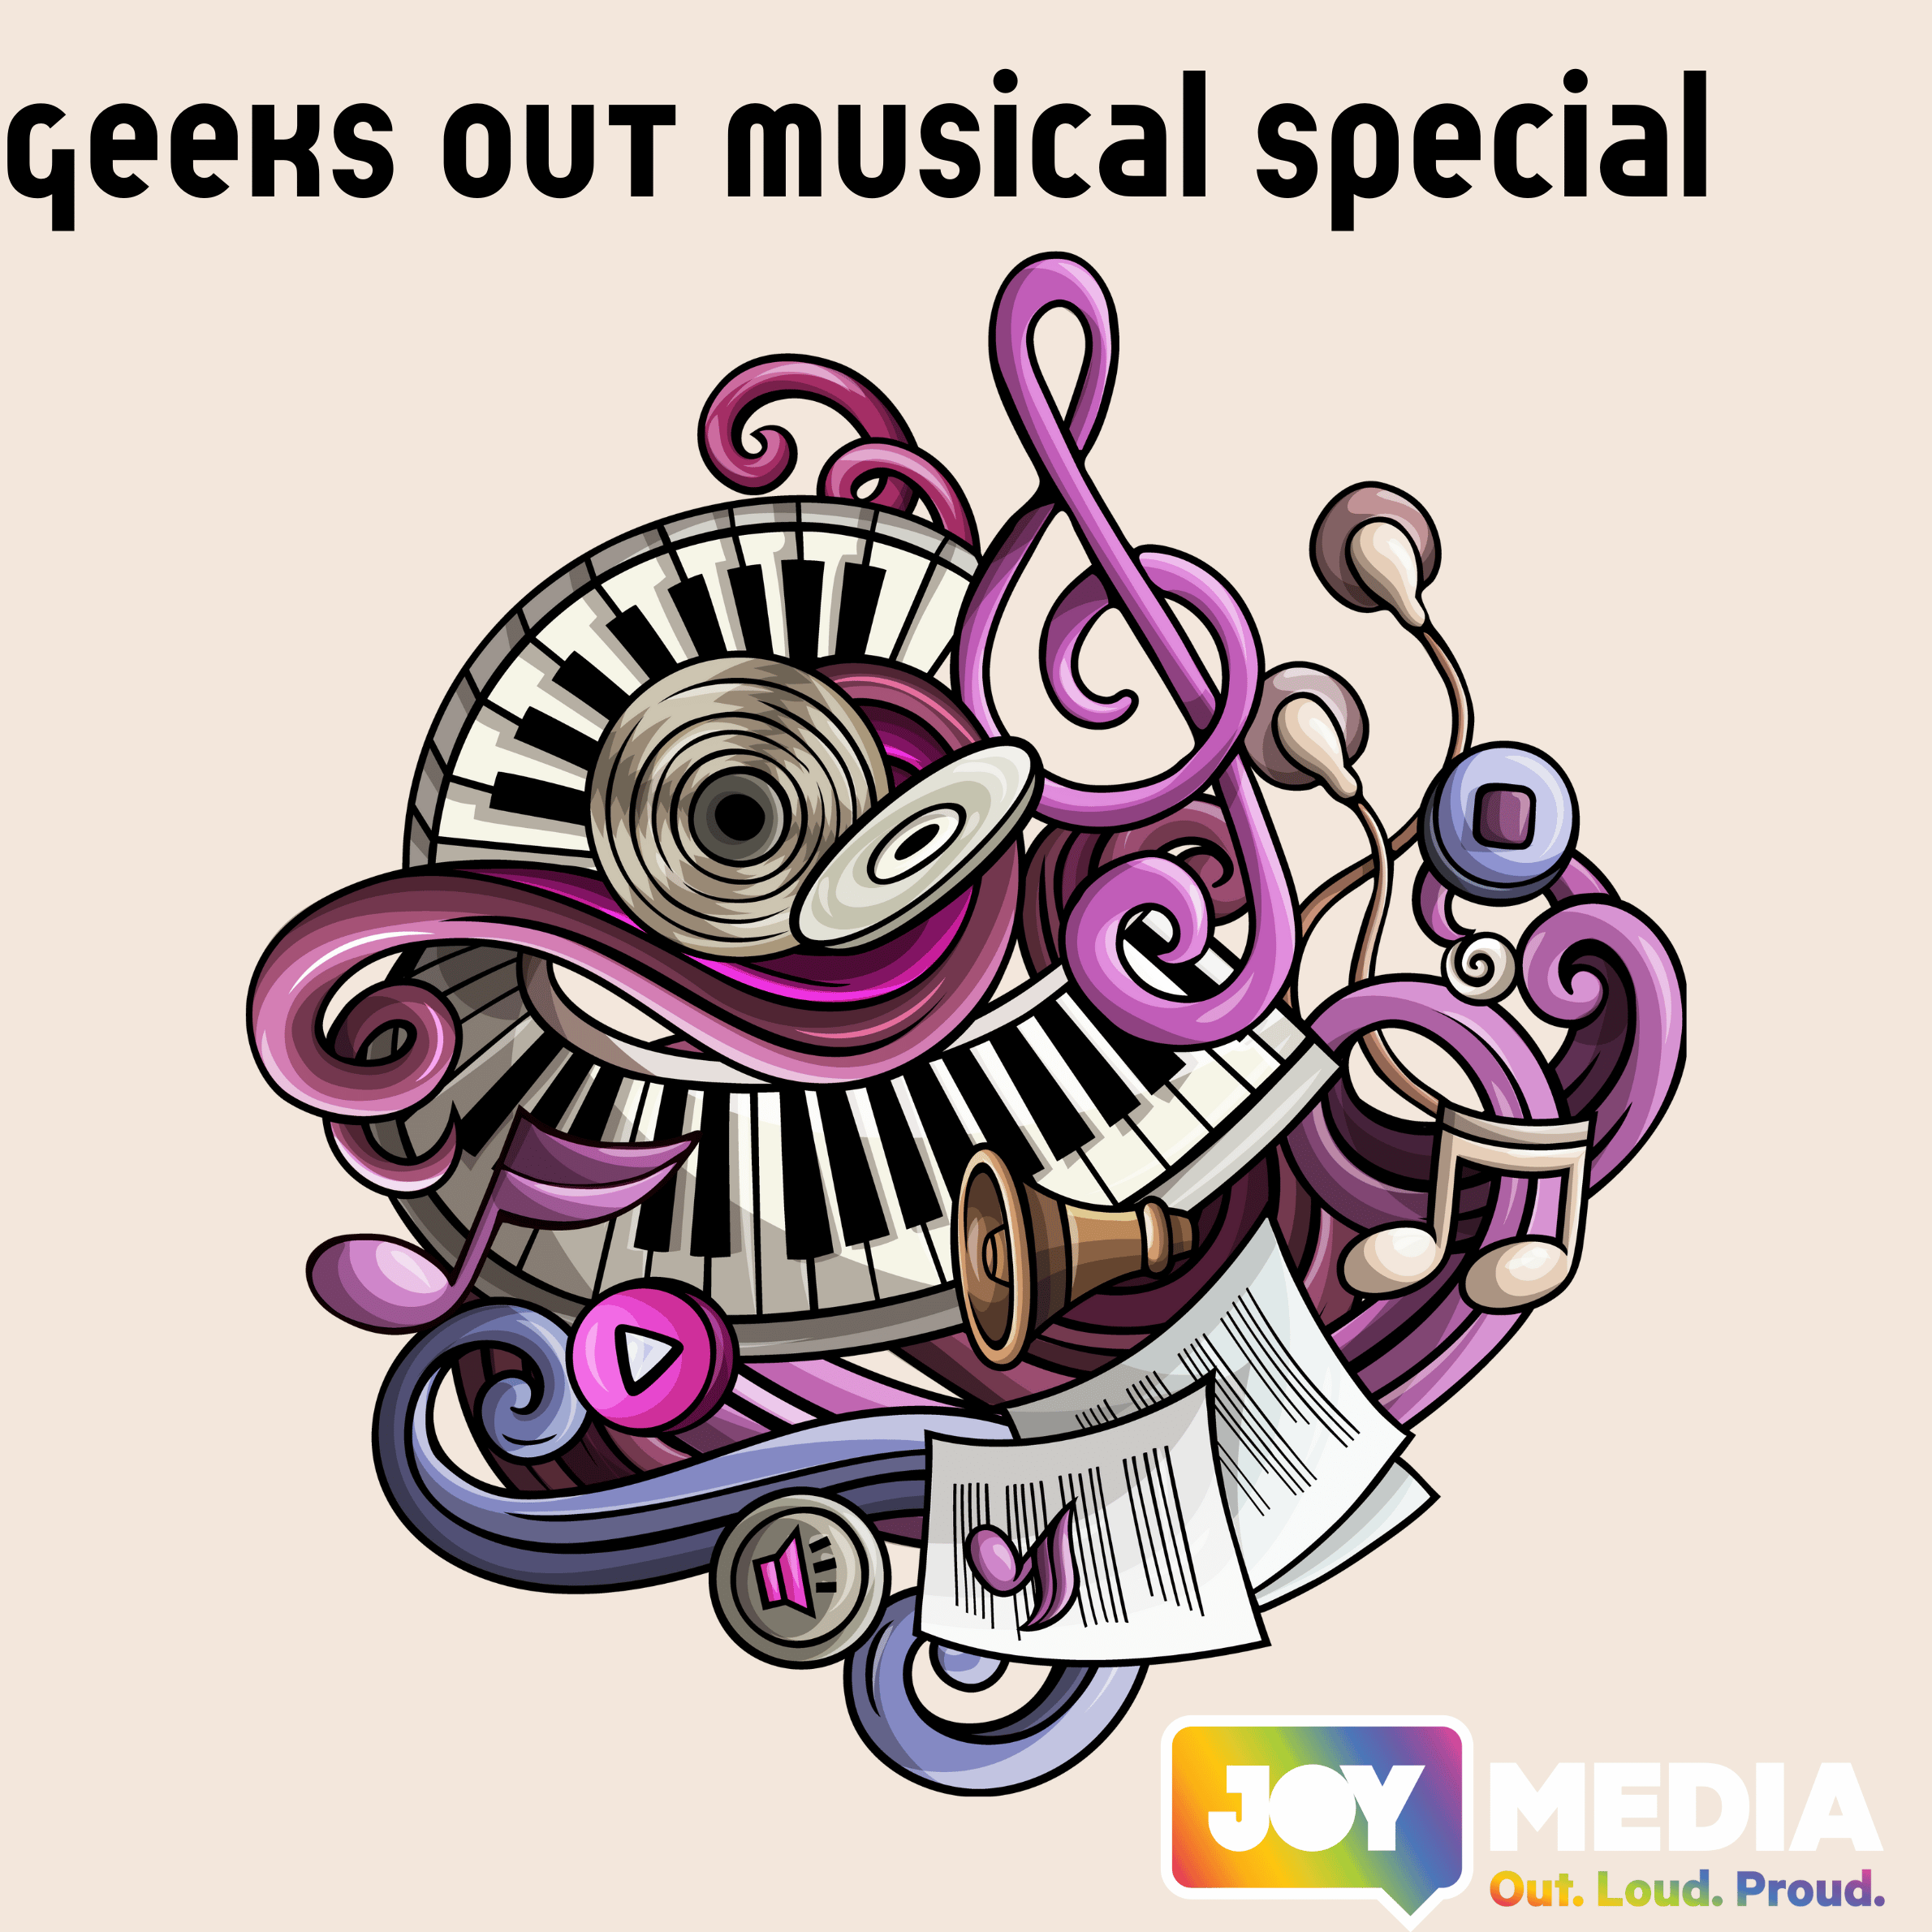 Musical Special